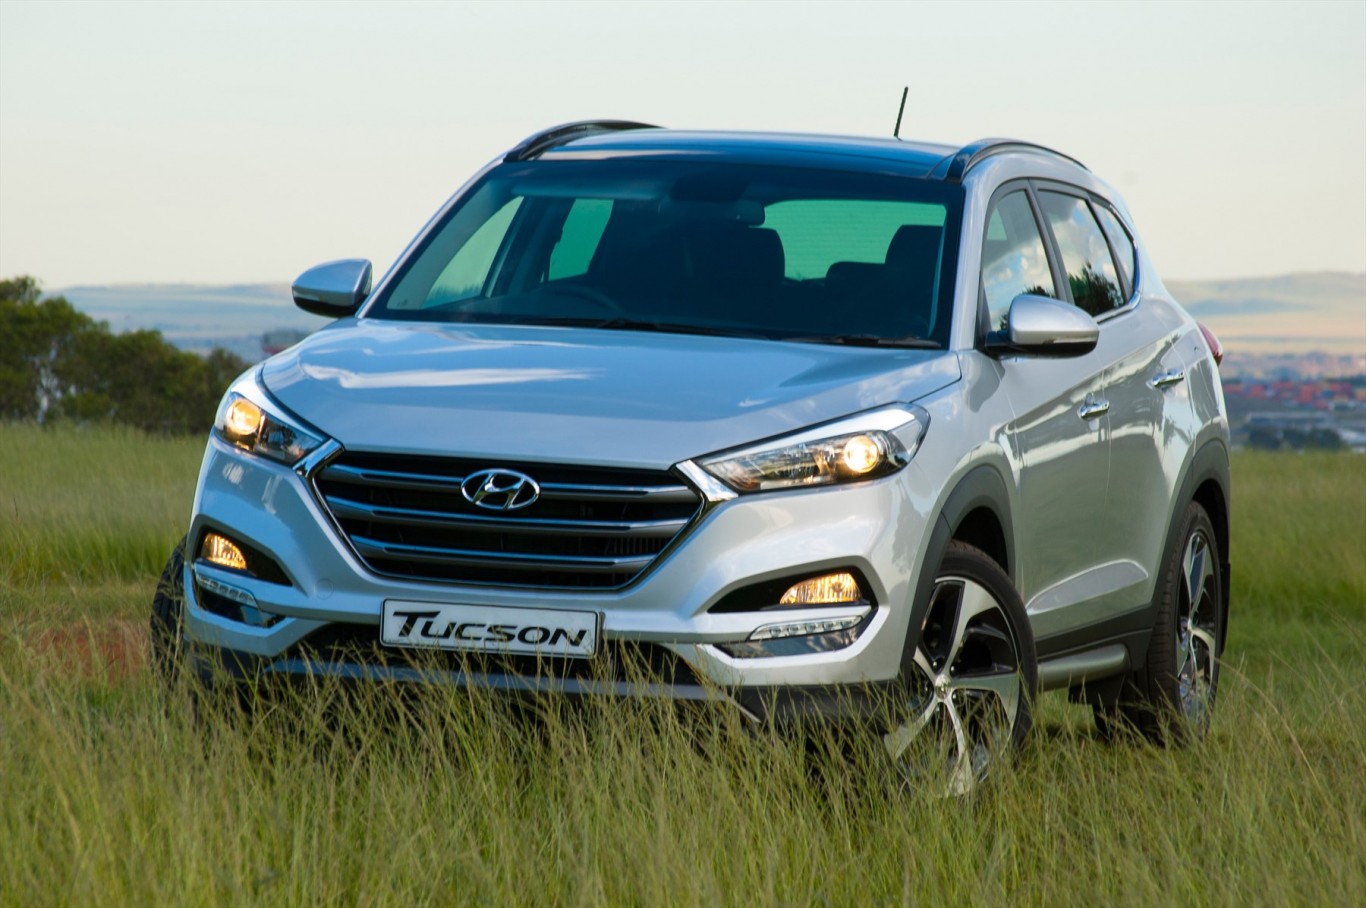 All-new Hyundai SUV launched, proudly wearing Tucson badge again